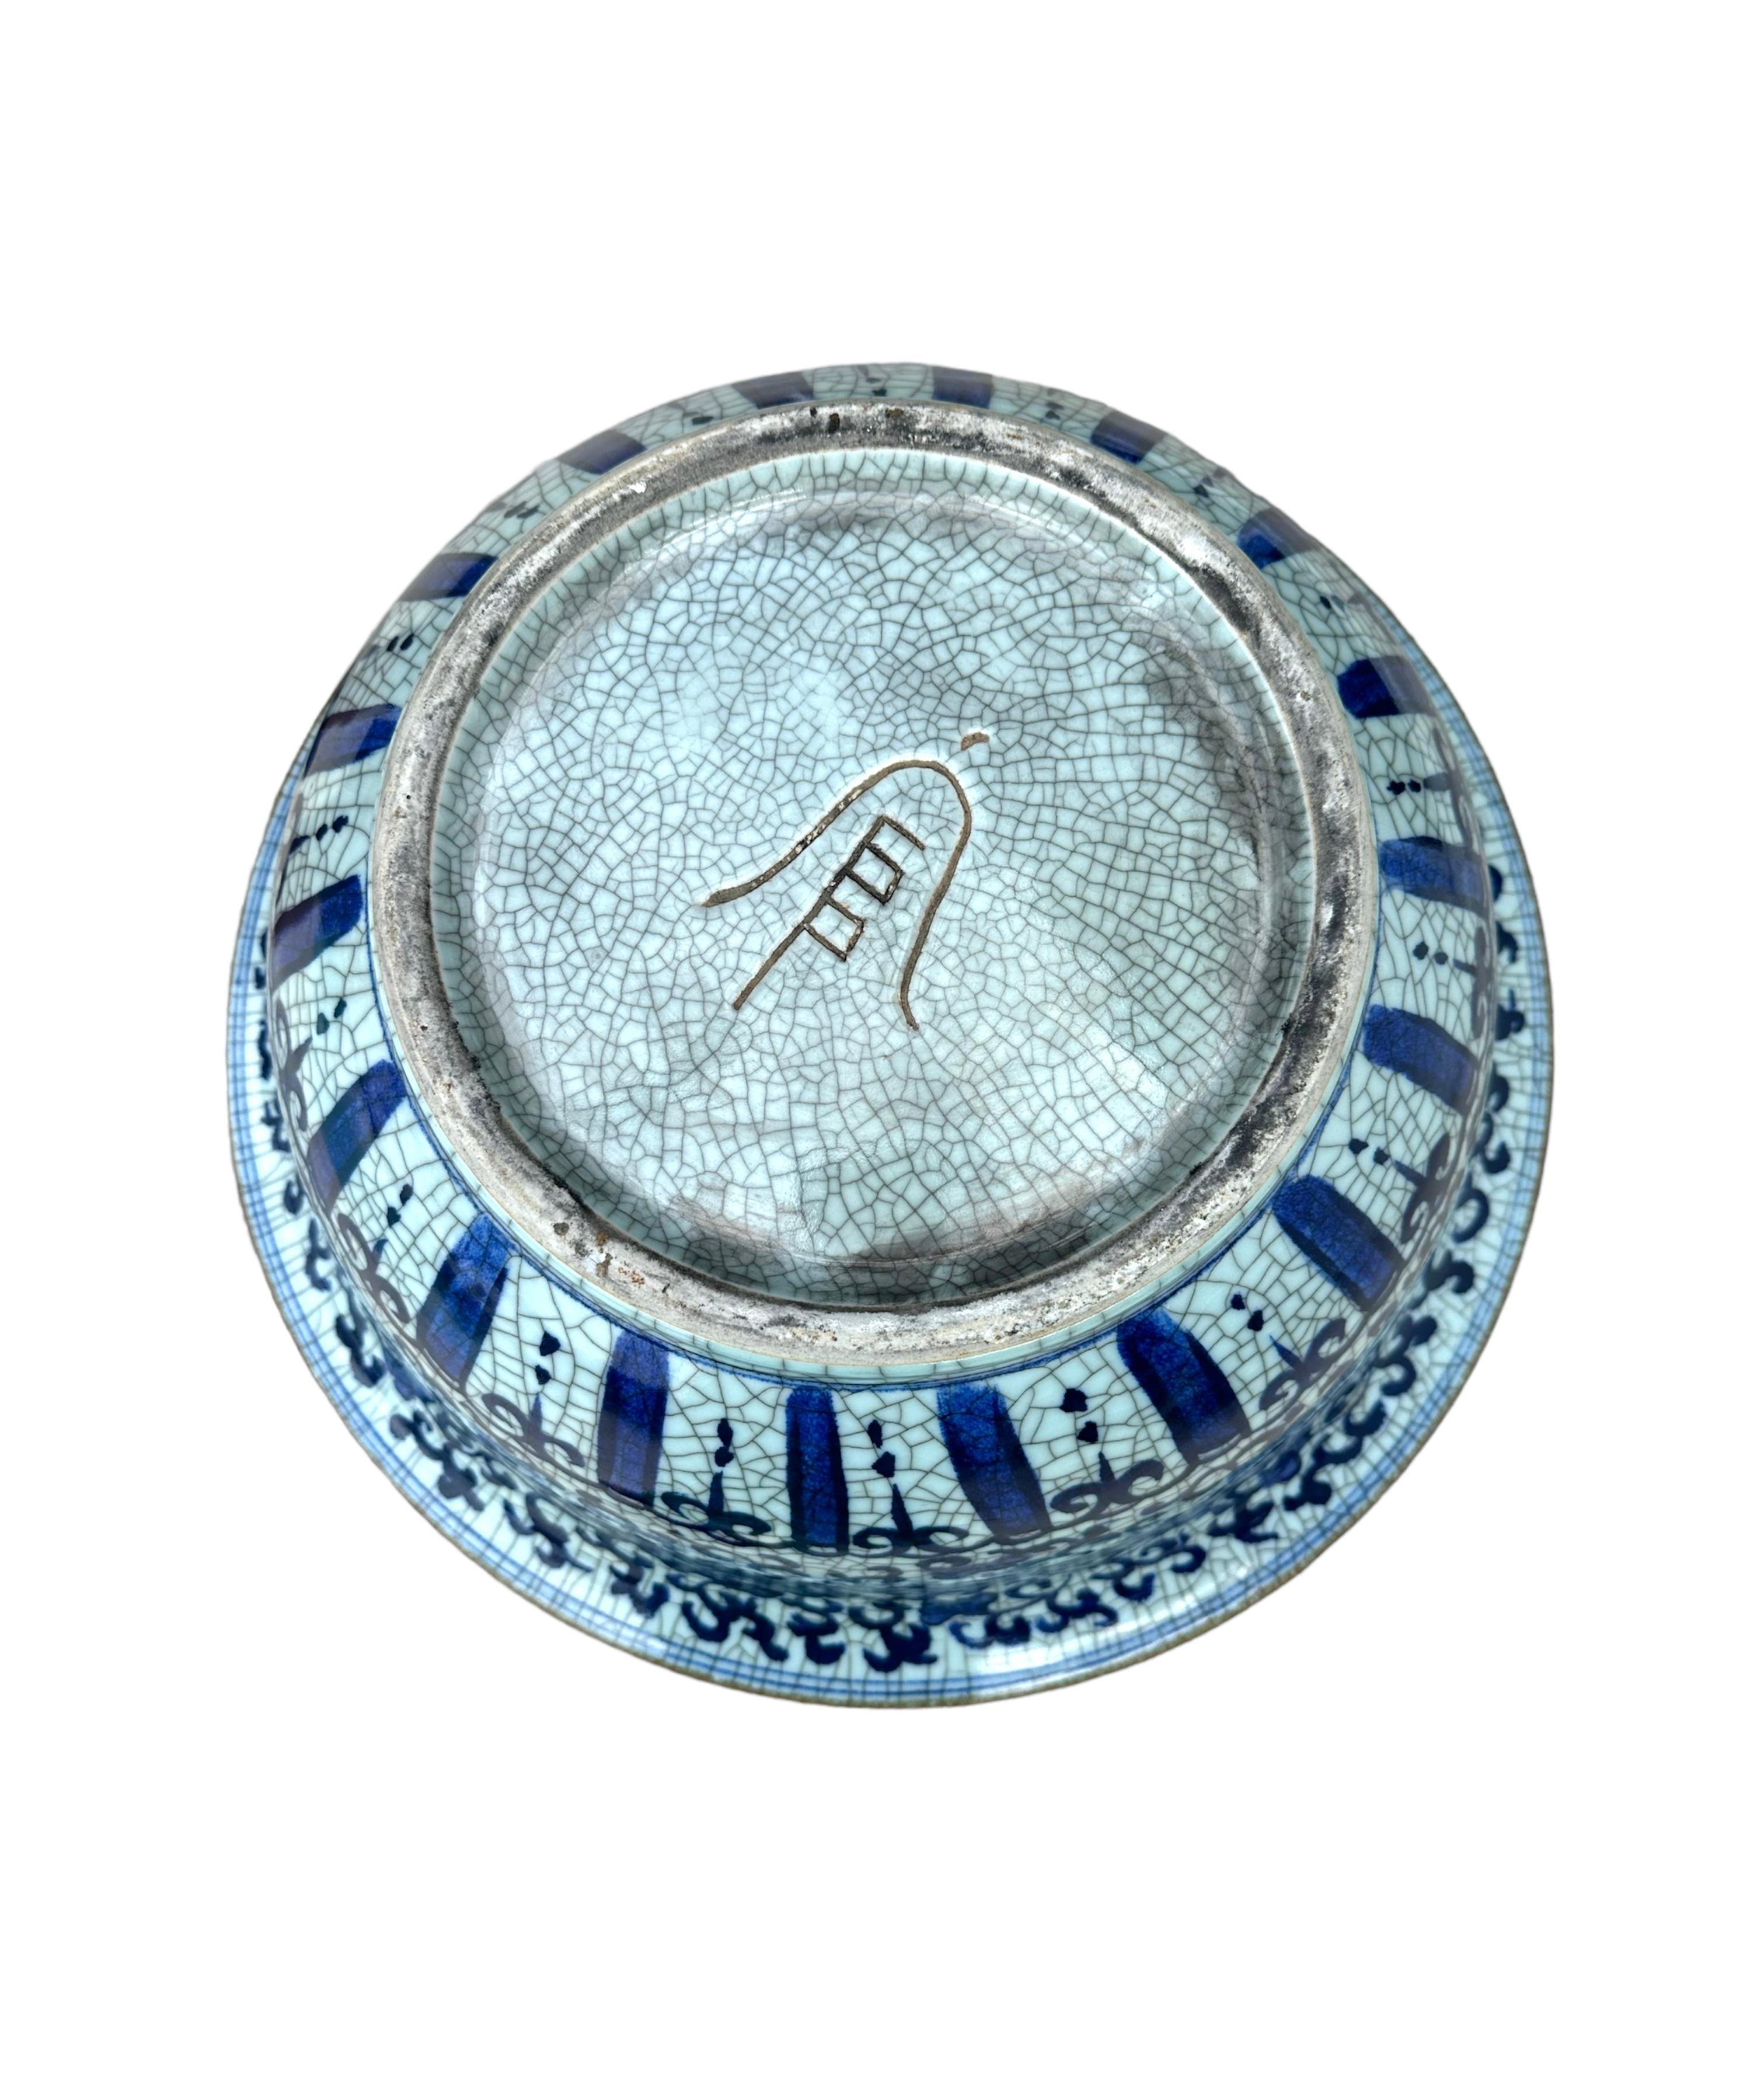 Blue And White Large Decorative Bowl Circa 1900’s In Good Condition For Sale In Jupiter, FL